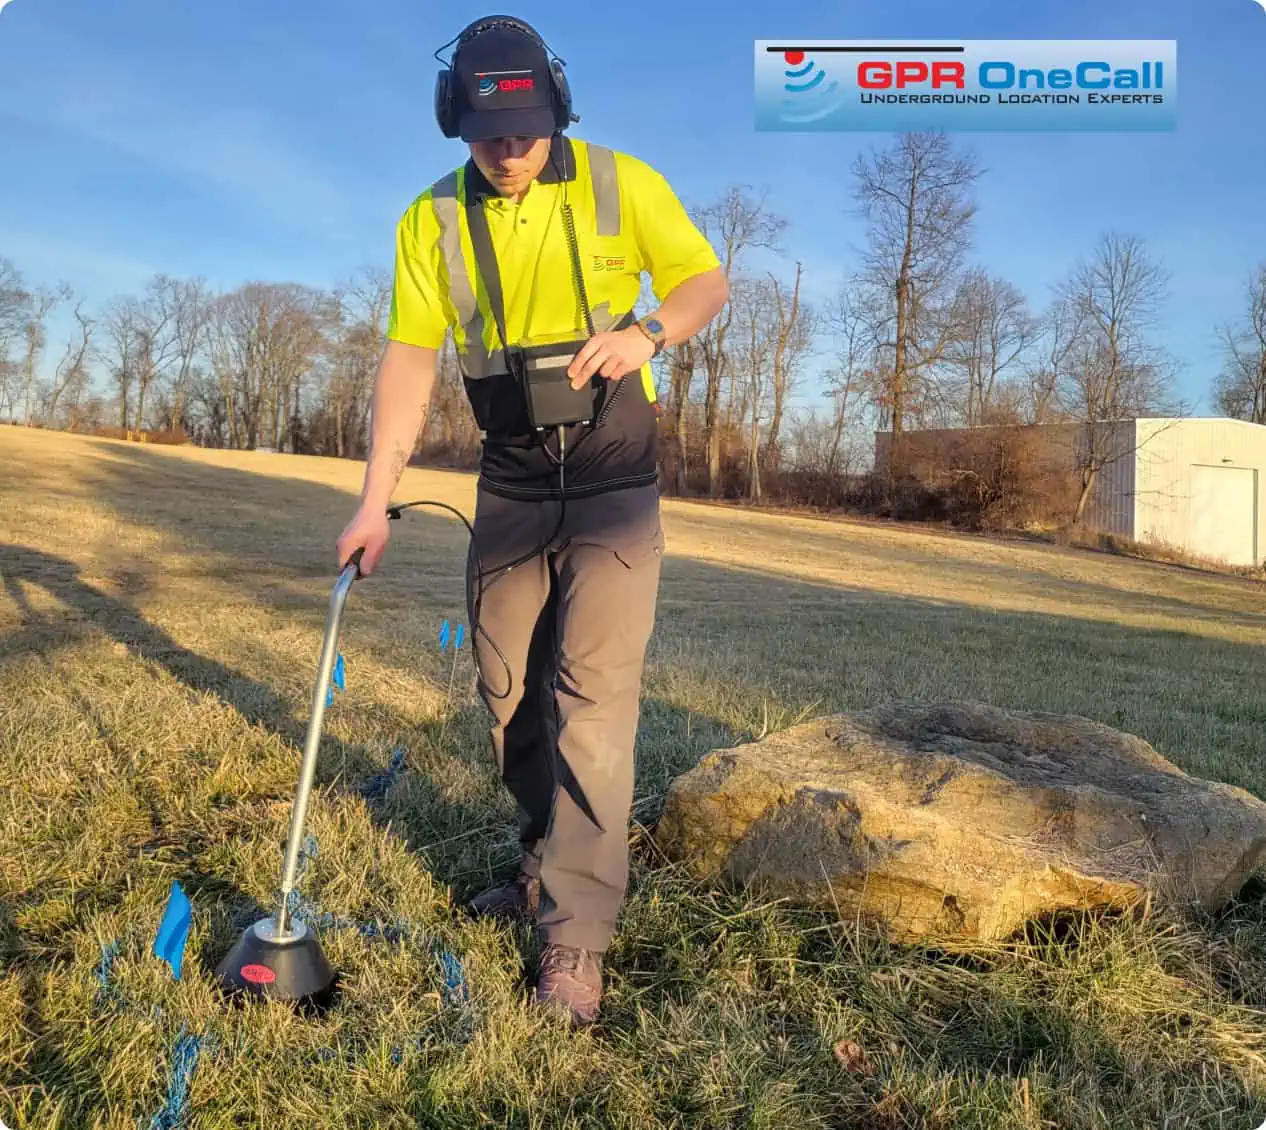 Outdoor Utility Scanning with GPR on Grassy Terrain